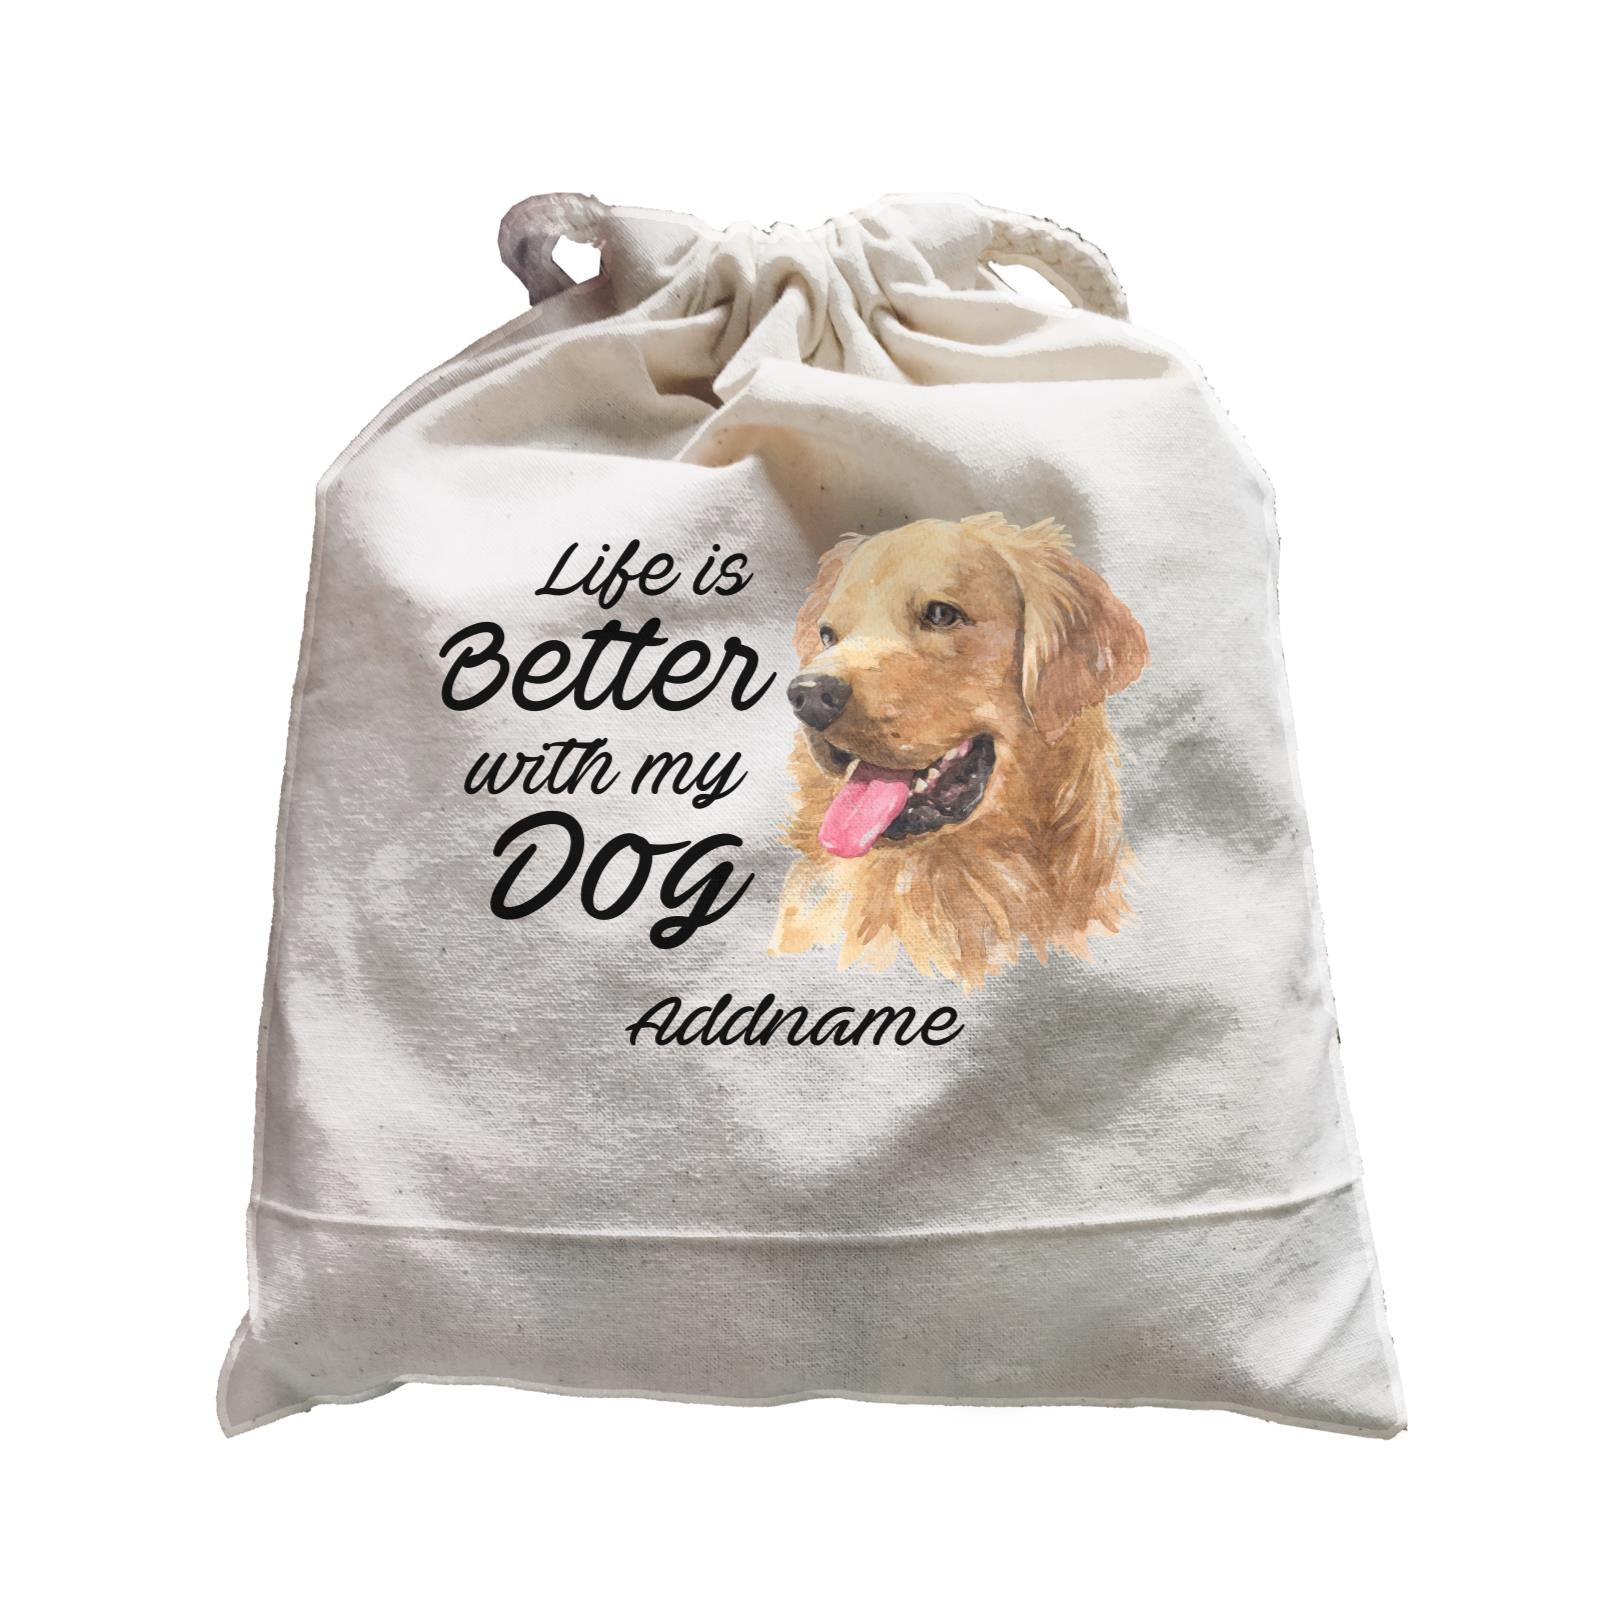 Watercolor Life is Better With My Dog Golden Retriever Left Addname Satchel